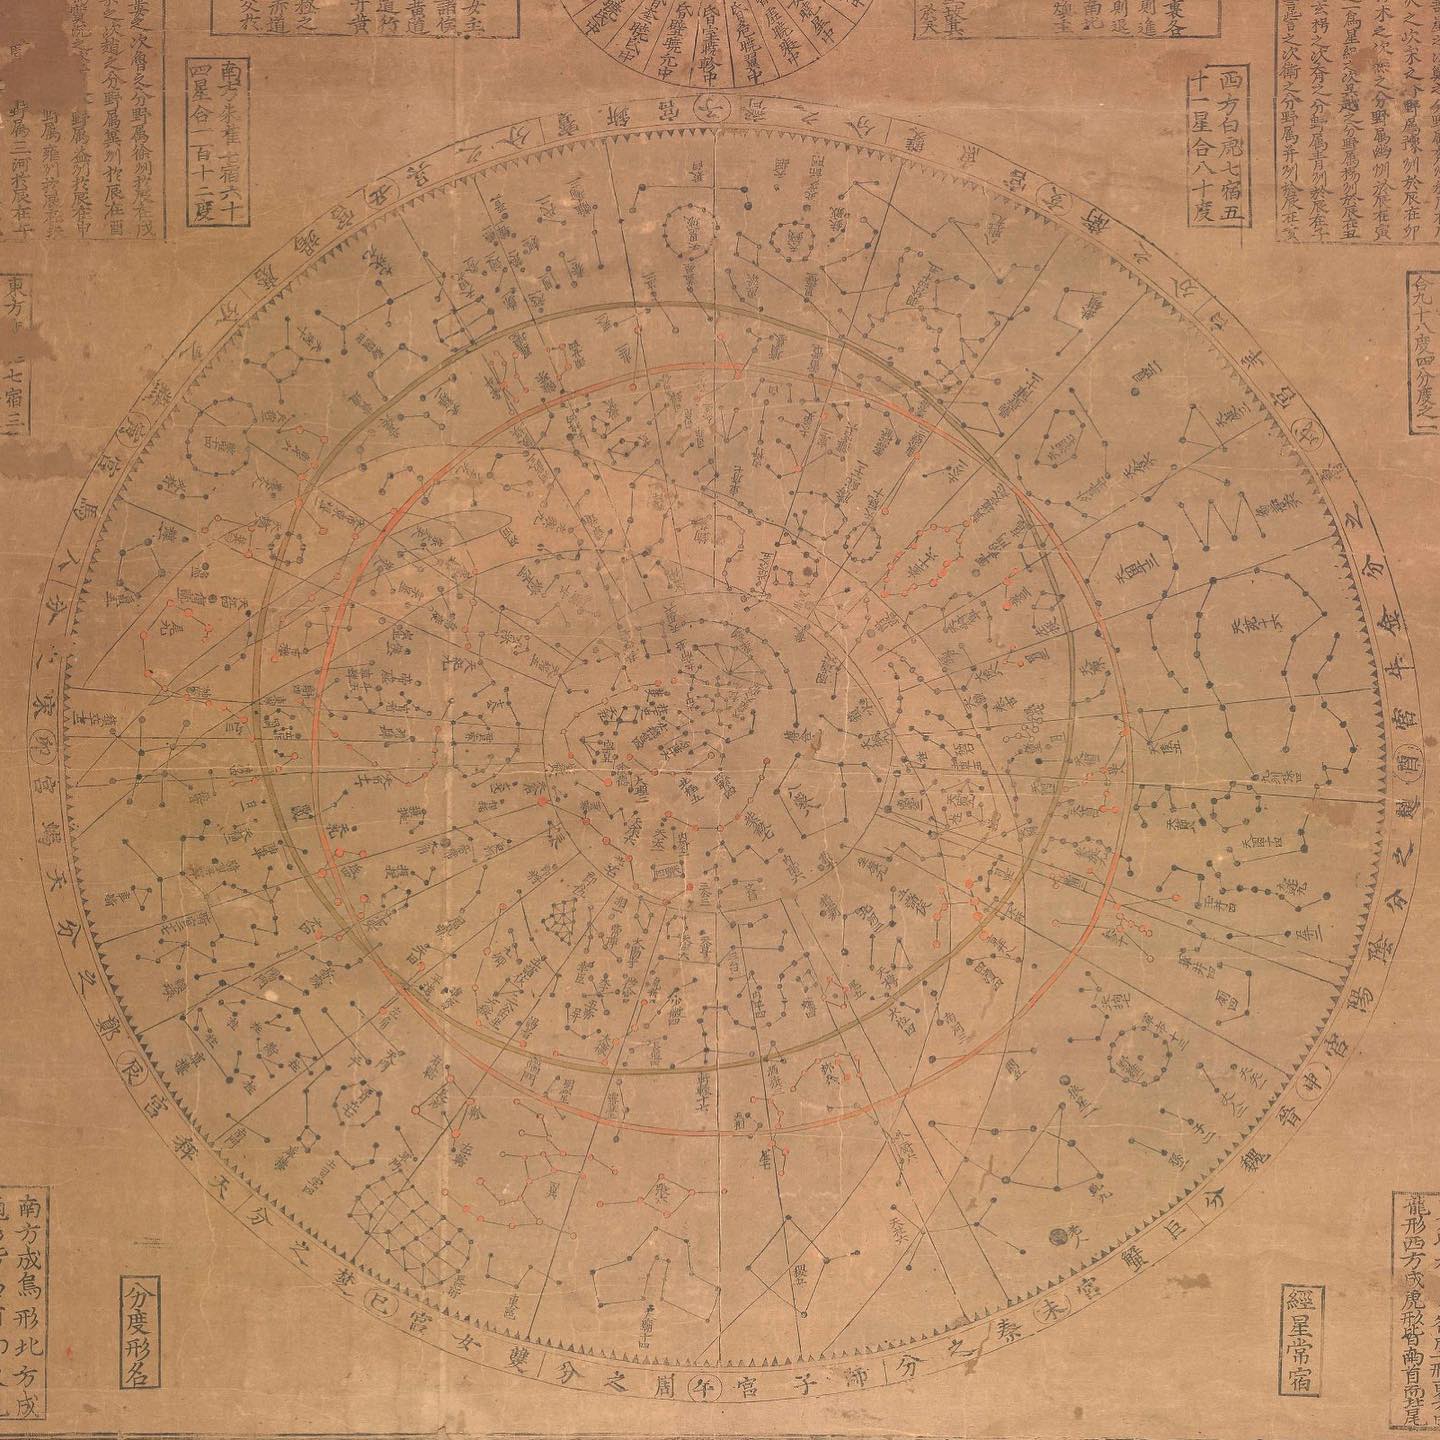 Astronomical science of Joseon dynasty

Woodblock print of celestial chart stone, 1571, woodblock print on paper, 129.0x83.0cm, national palace museum of Korea

#korea #nrich #koreanheritage #kheritage #koreatreasure #korearesesarch #heritagekr #kculture

Copyright 2022. NRICH all rights reserved.